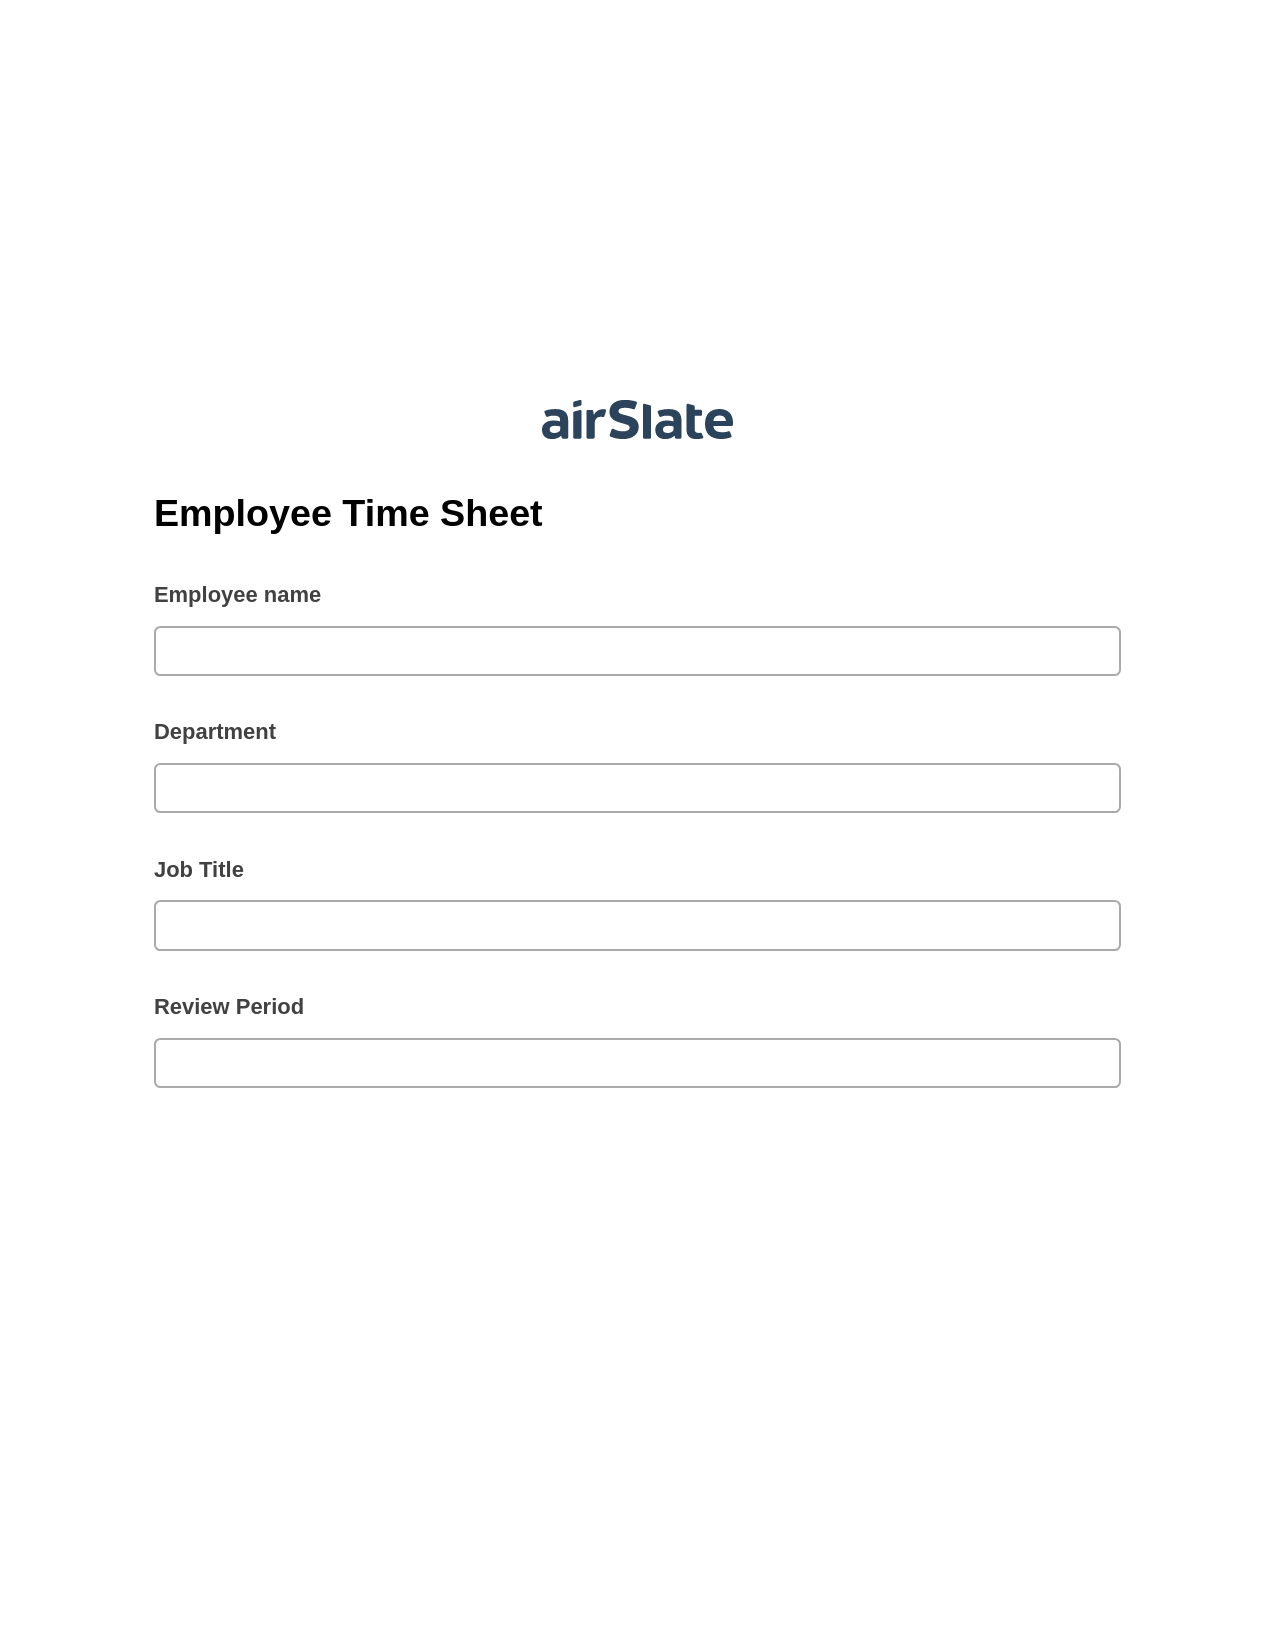 Employee Time Sheet Pre-fill from Salesforce Records with SOQL Bot, Update Audit Trail Bot, Export to Smartsheet